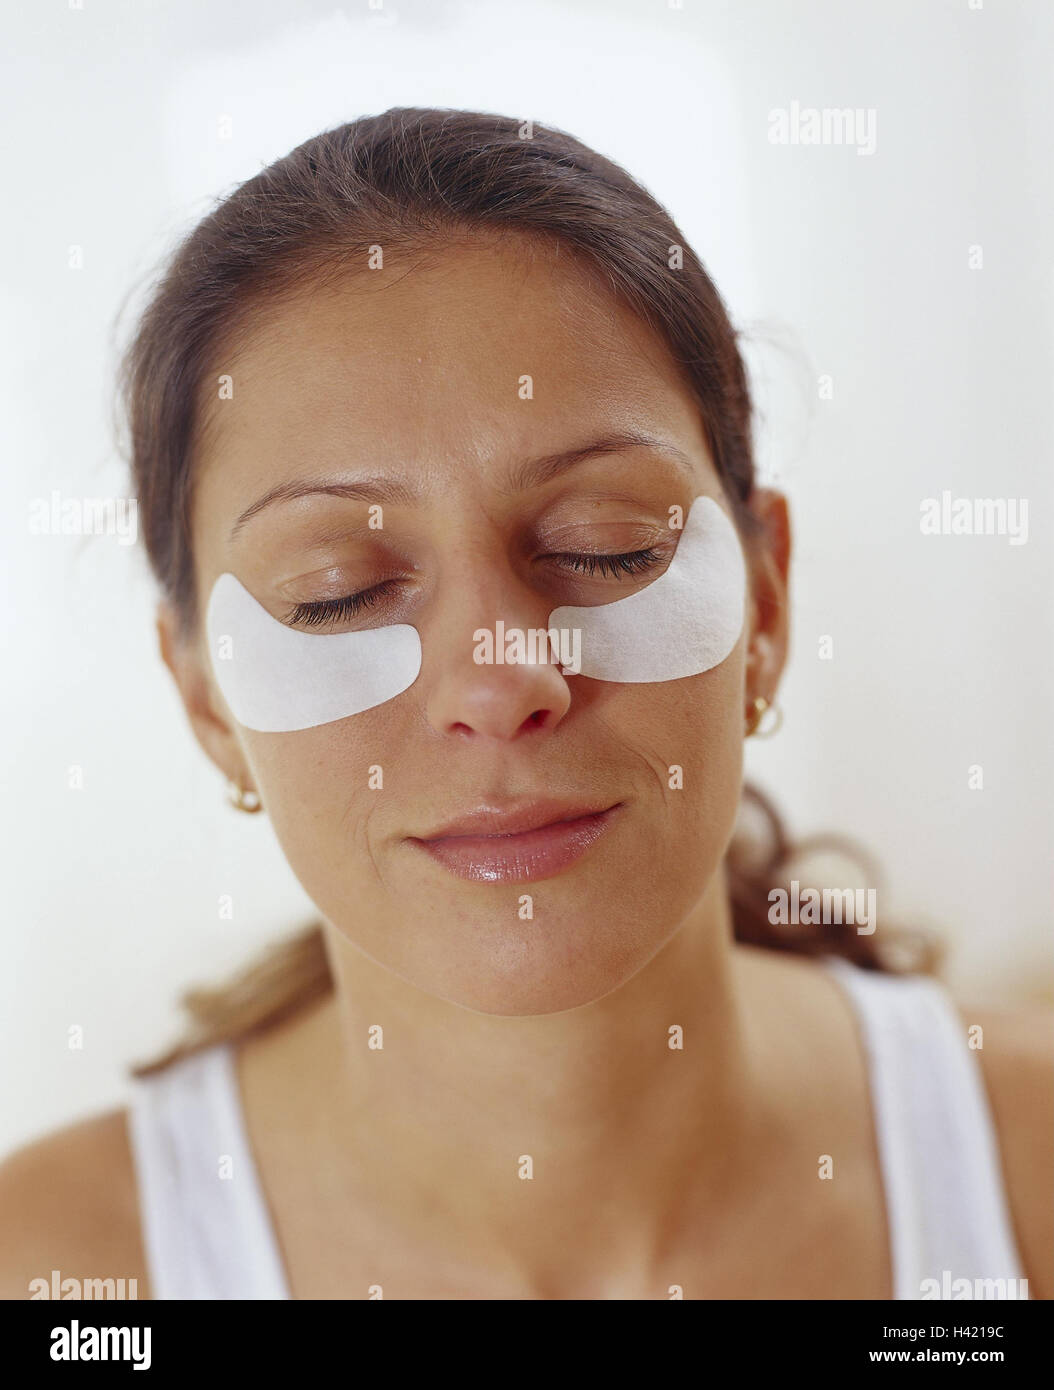 Woman, eyes closed, Augen-Pads, portrait, model released, cosmetics, facial care, shell care, young, long-haired, brunette, eye area, Pads, Eye-Pads, ocular contouring Gel-Pads, maintain, beauty care, pleated reduction, care, prophylaxis, shell ageing, st Stock Photo